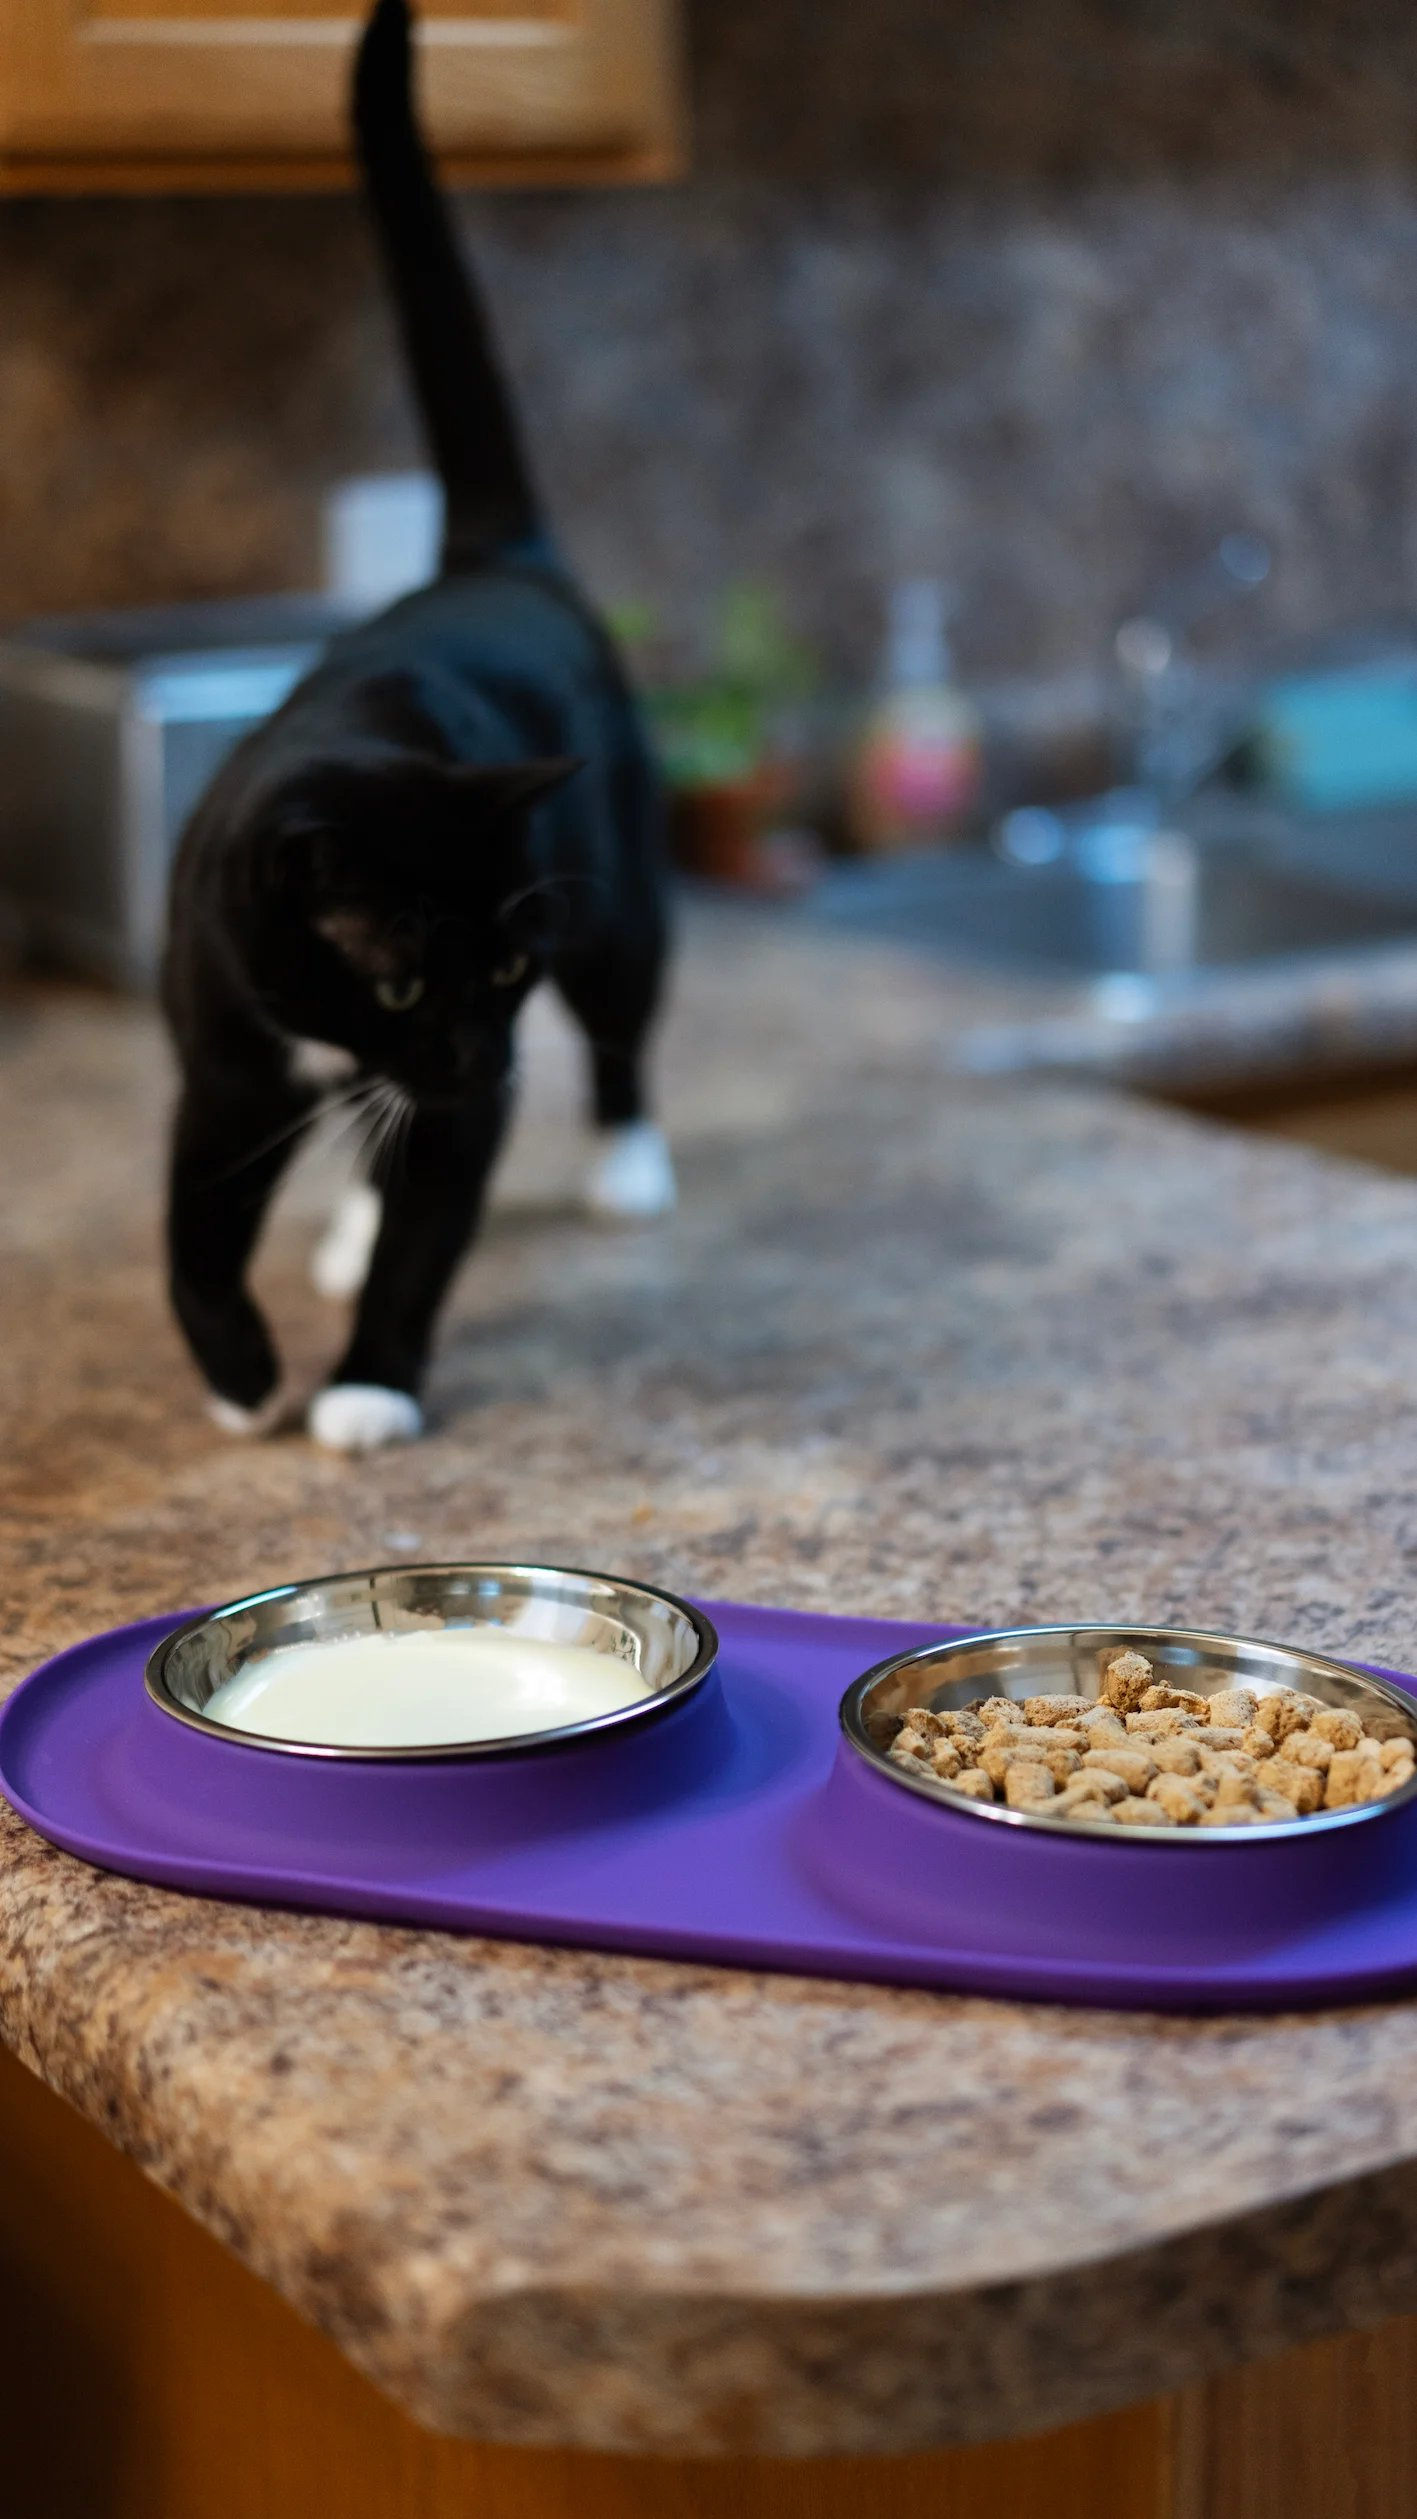 black cat on a counter eating from a purple double cat feeder